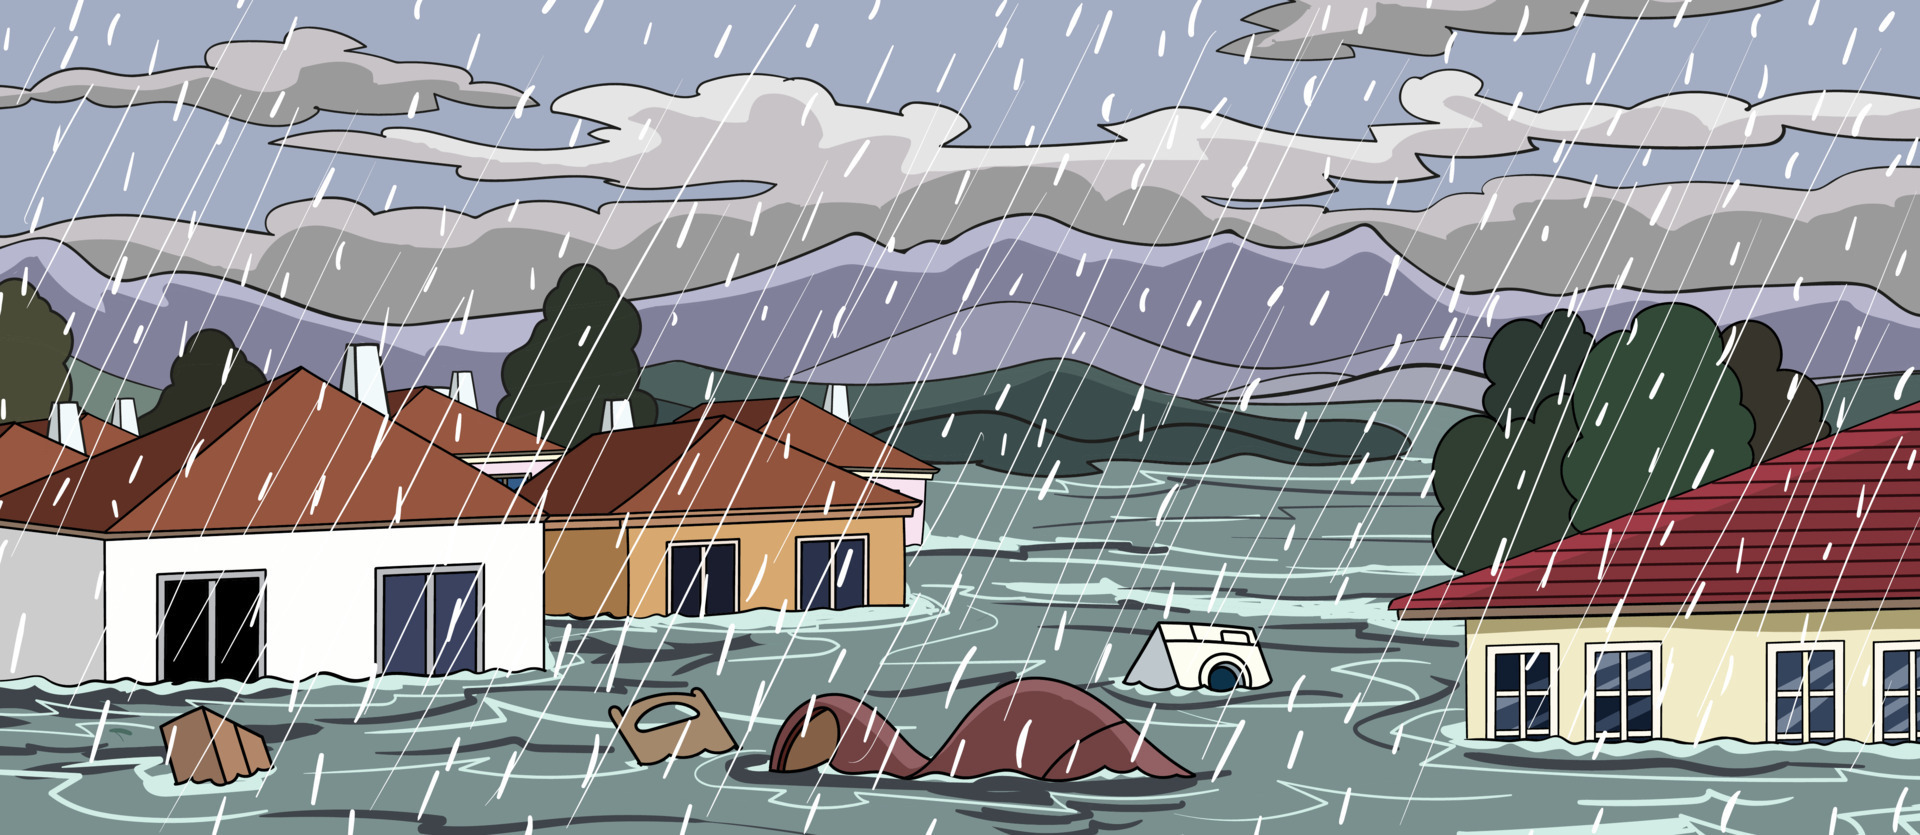 Flood in town, river water stream flow at city street with cottage houses.  Natural disaster with rain and storm at countryside area with flooded  buildings, climate change. Cartoon vector illustration 14016830 Vector